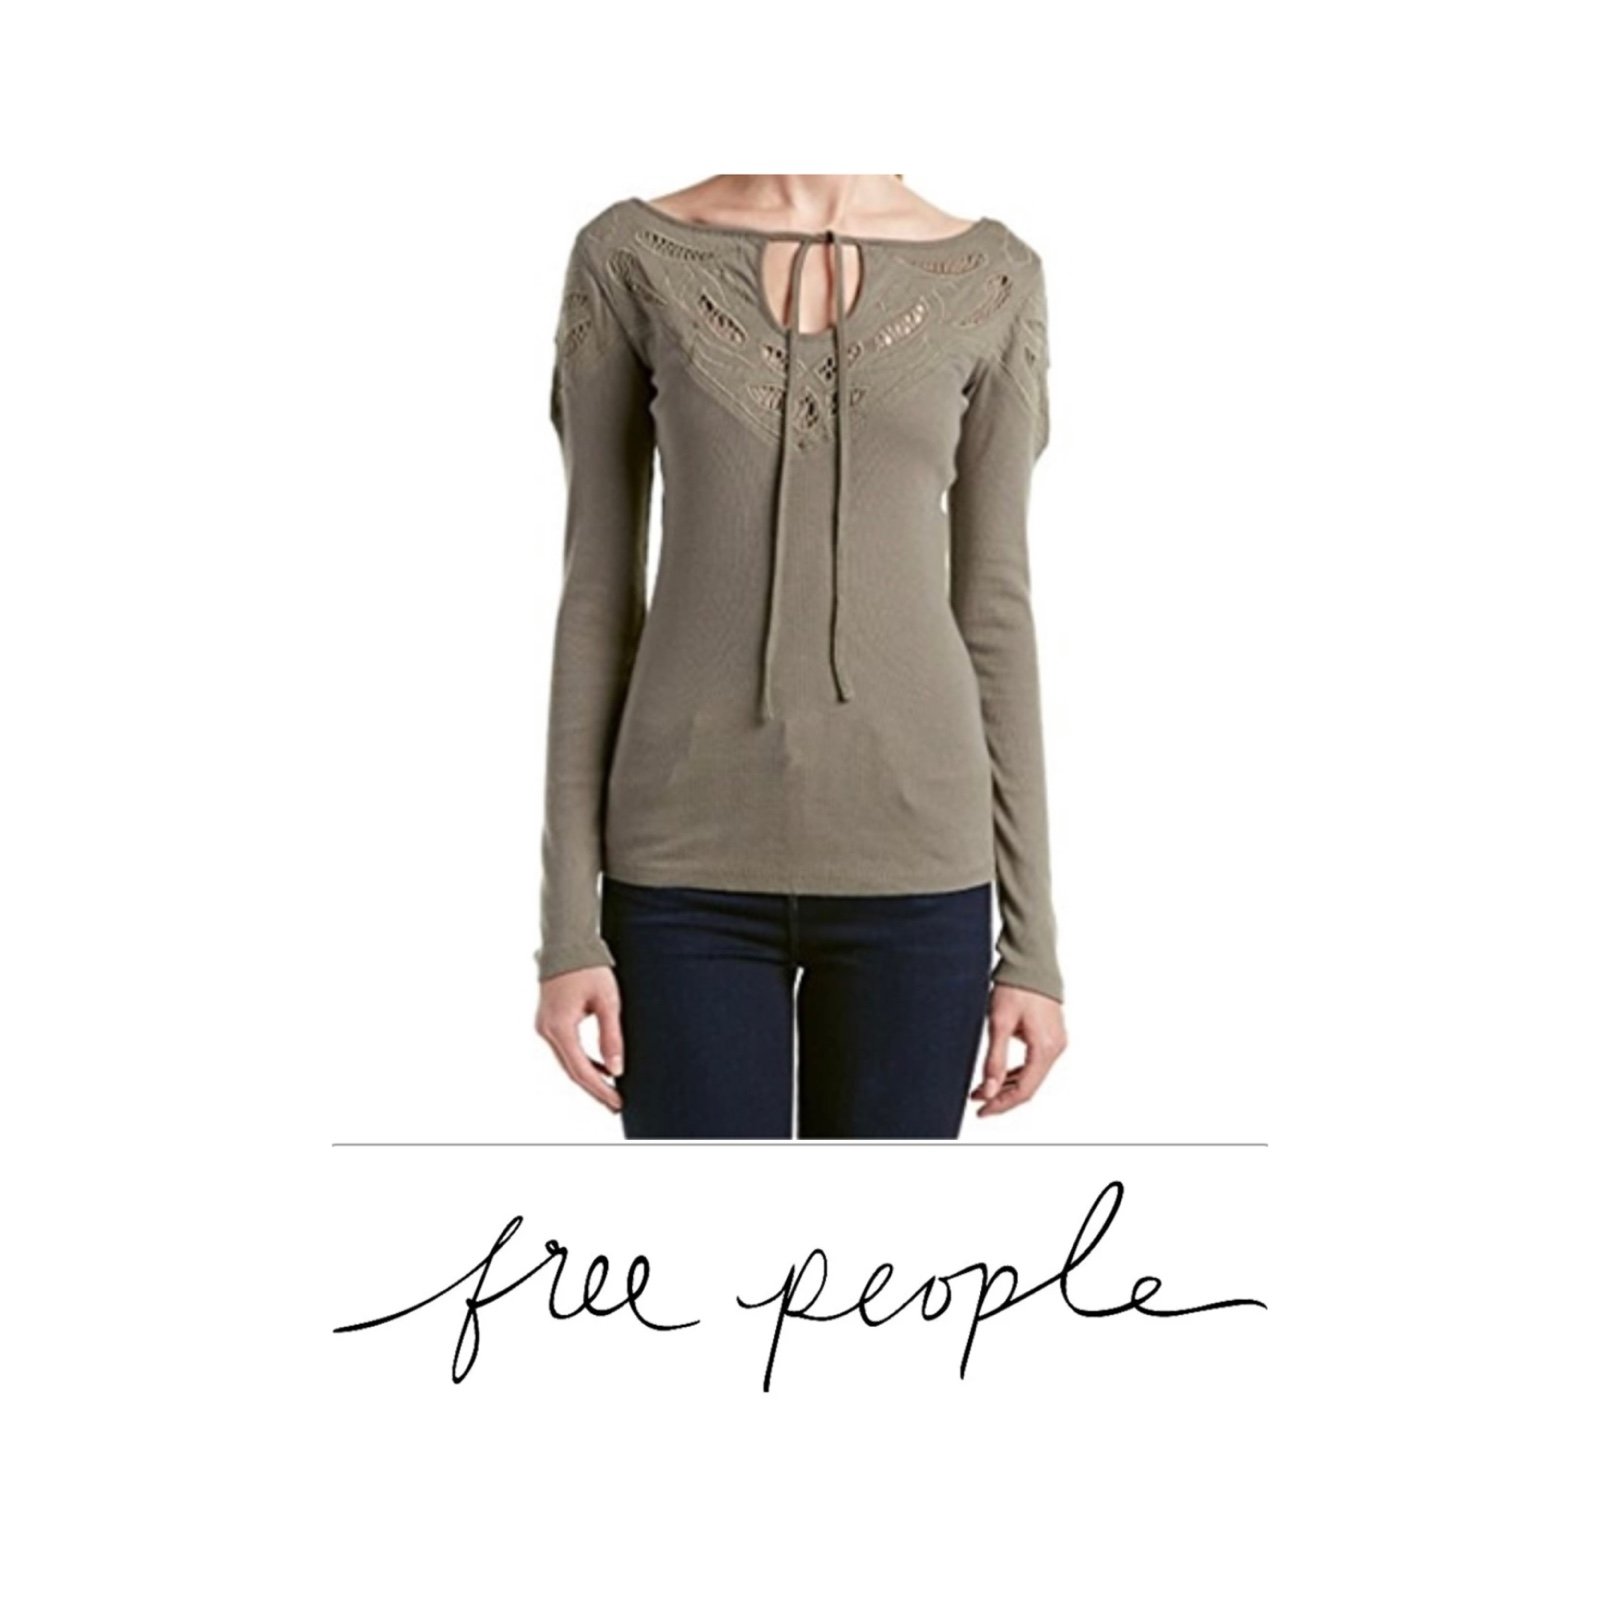 Nice Free People crochet knit top in olive green L8xFG8